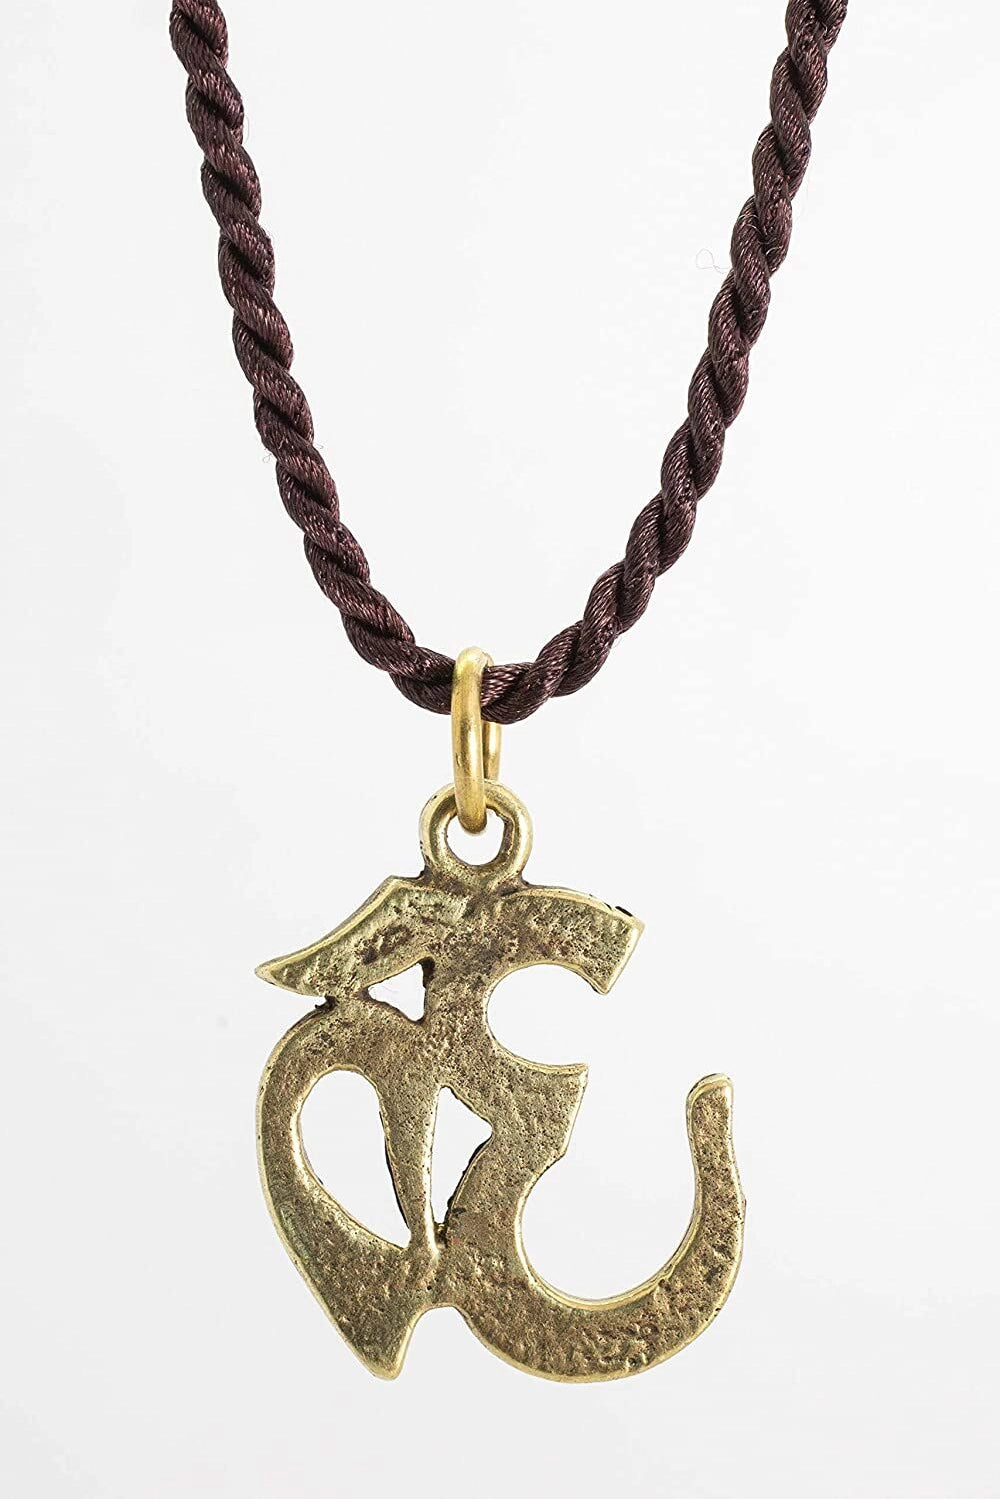 Hinduism OM Pendant Necklace (1 inch) - Moon Room Shop and Wellness